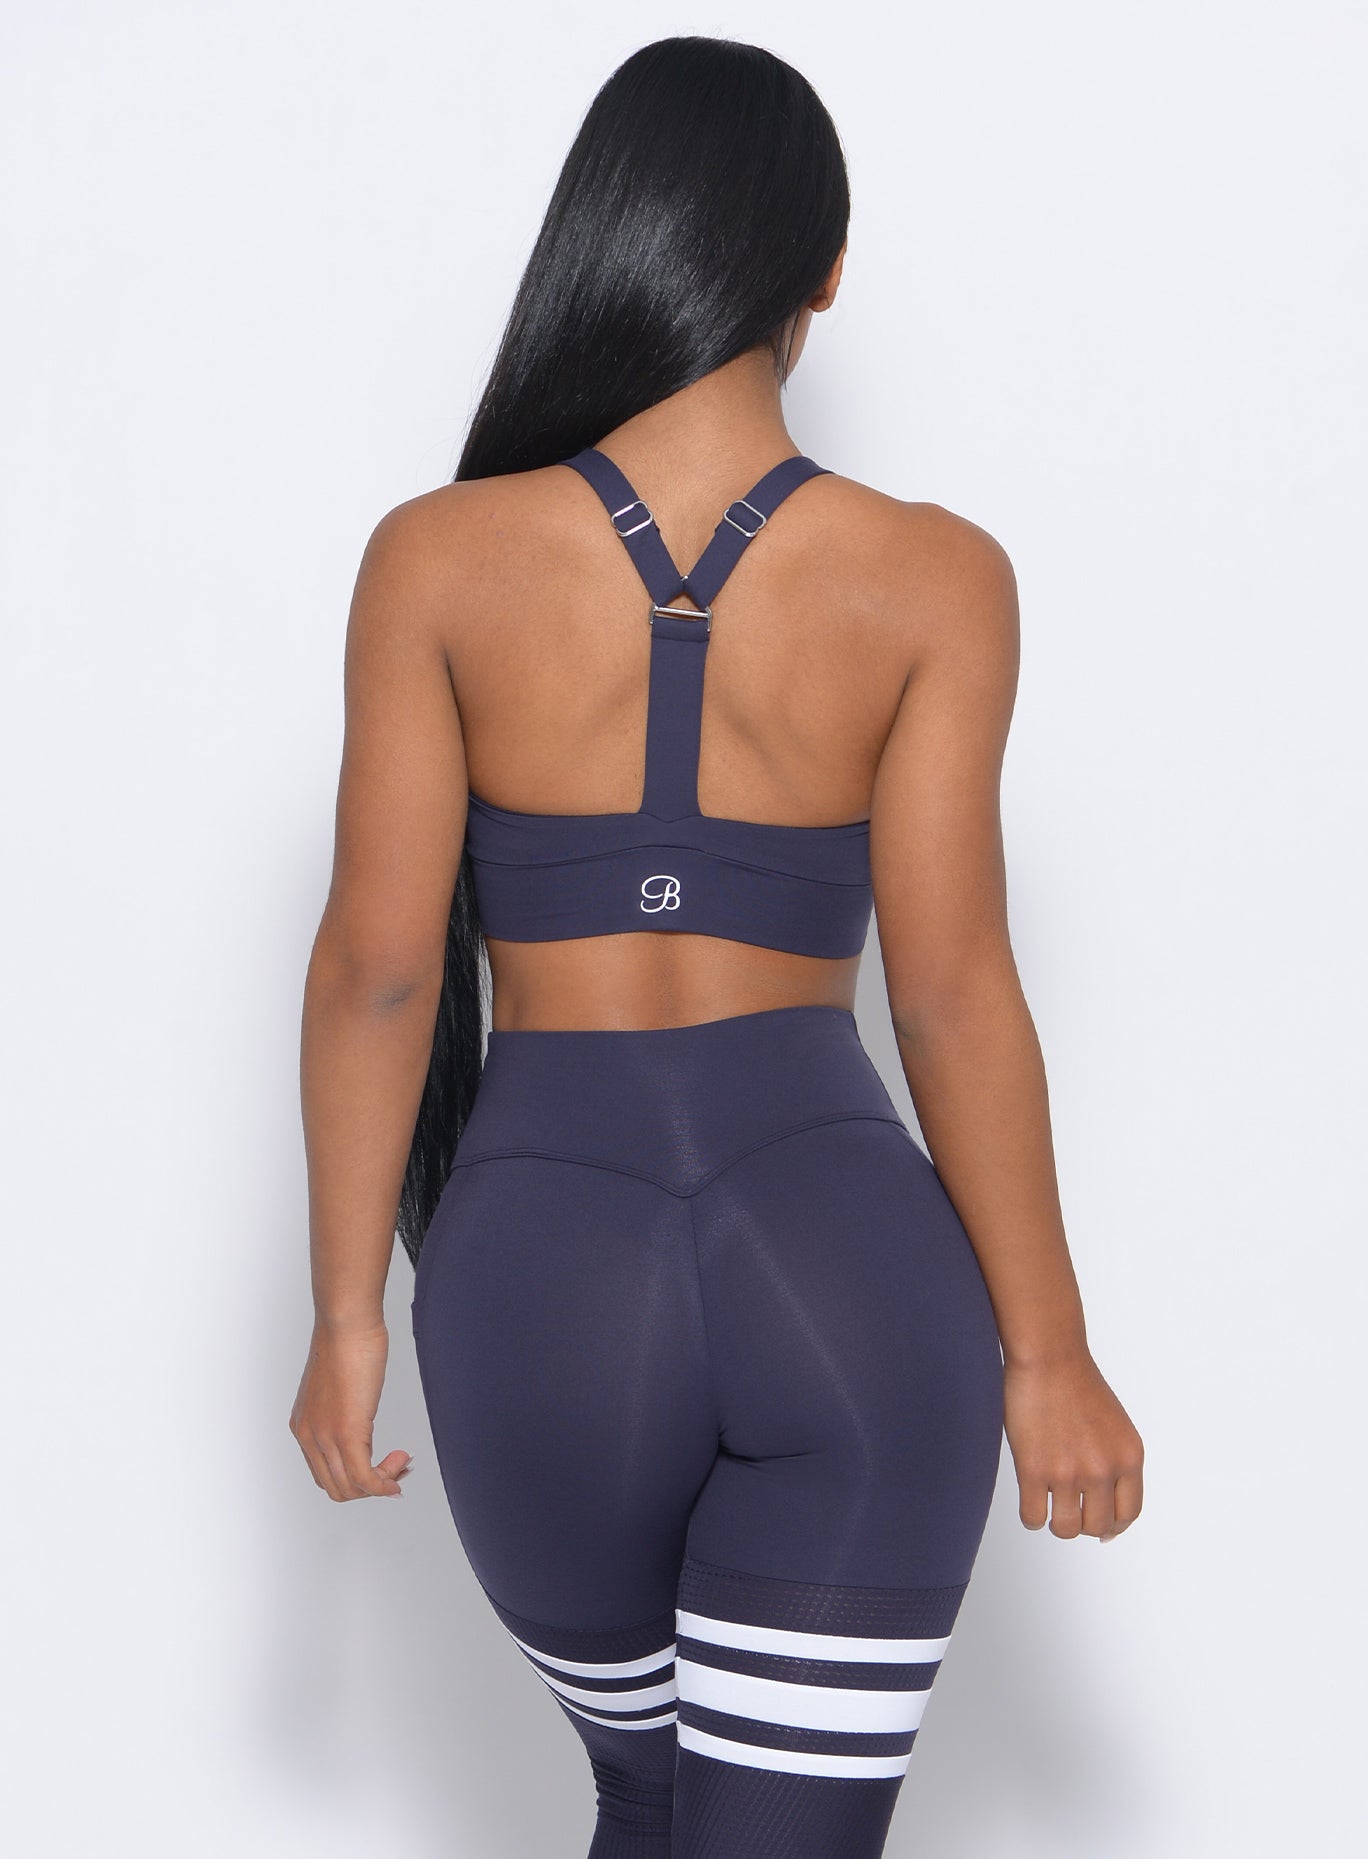 Back view of the model in our synergy sports bra in twilight blue color and a matching leggings